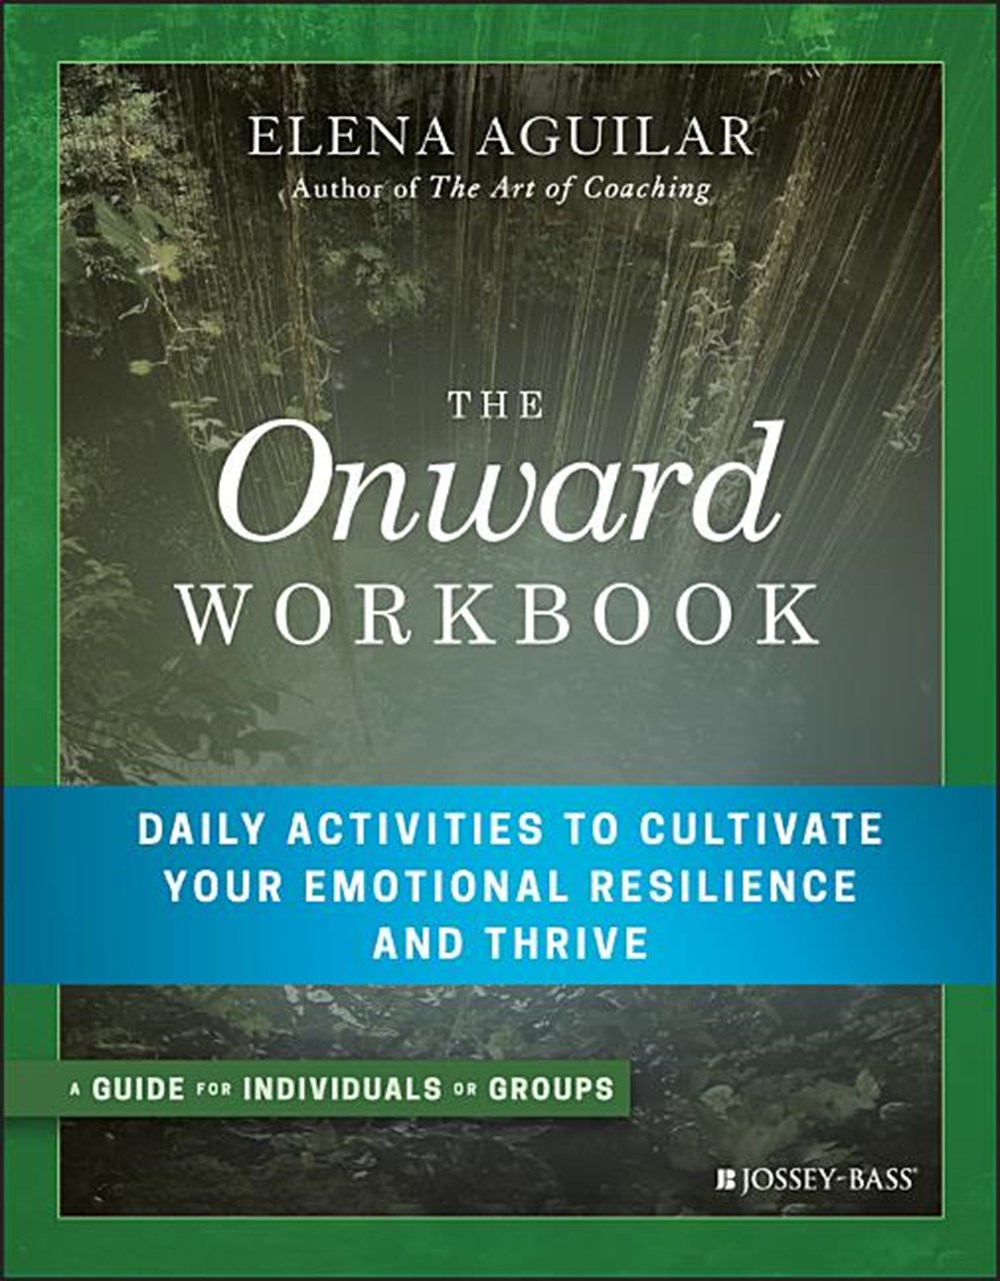 Onward Workbook Daily Activities to Cultivate Your Emotional Resilience and Thrive